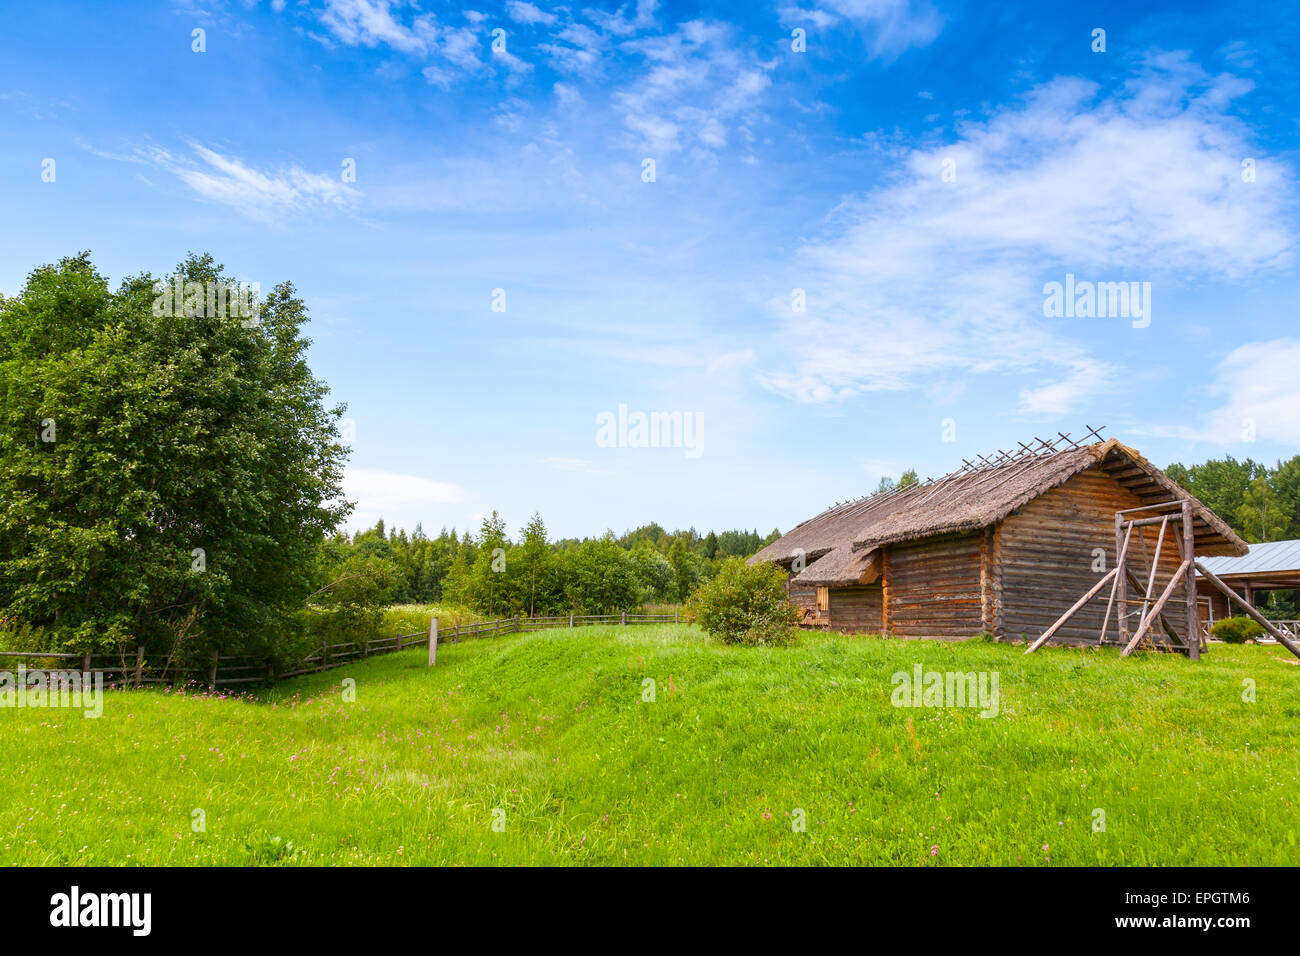 Russian rural landscape with old wooden barns on green hills under bright blue cloudy sky Stock Photo